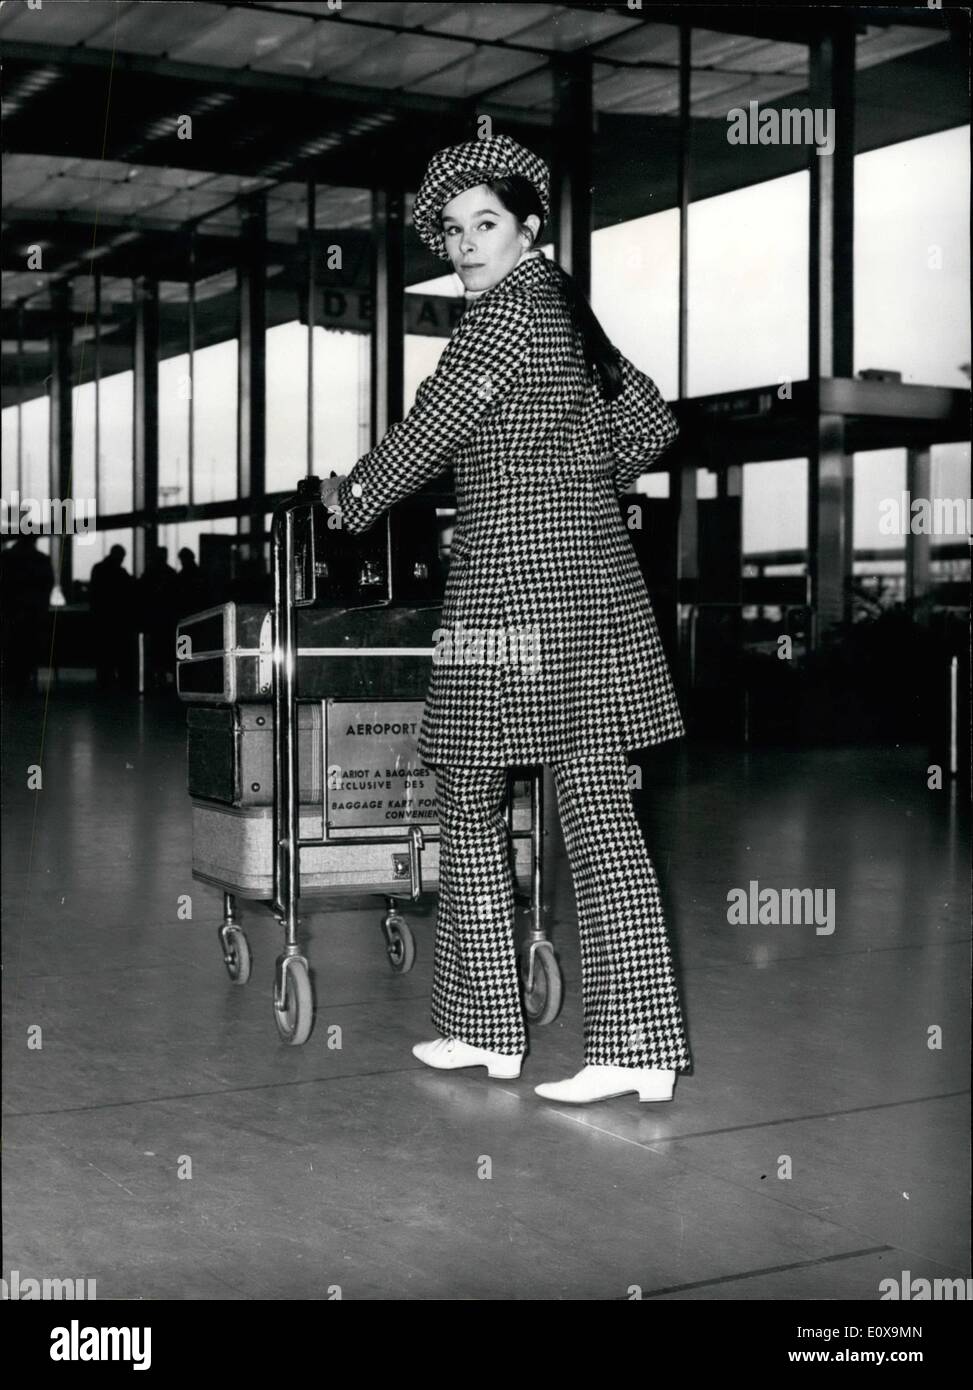 Dec. 12, 1965 - Off to new york : Geraldine Chaplin, charlie chaplain's actress laughter, left for new york this morning, she will attend the world premiere of the film ''Doctor Zhivago'', based can the famous pastenak's novel in which she plays the role of Zhivago's wife opposite to cram Sharif. photo shows Geraldine Chaplin wearing a checkered travel outfit and a ''Kid'' cap picture at Orly airport pricy to coarsening the plane. Stock Photo